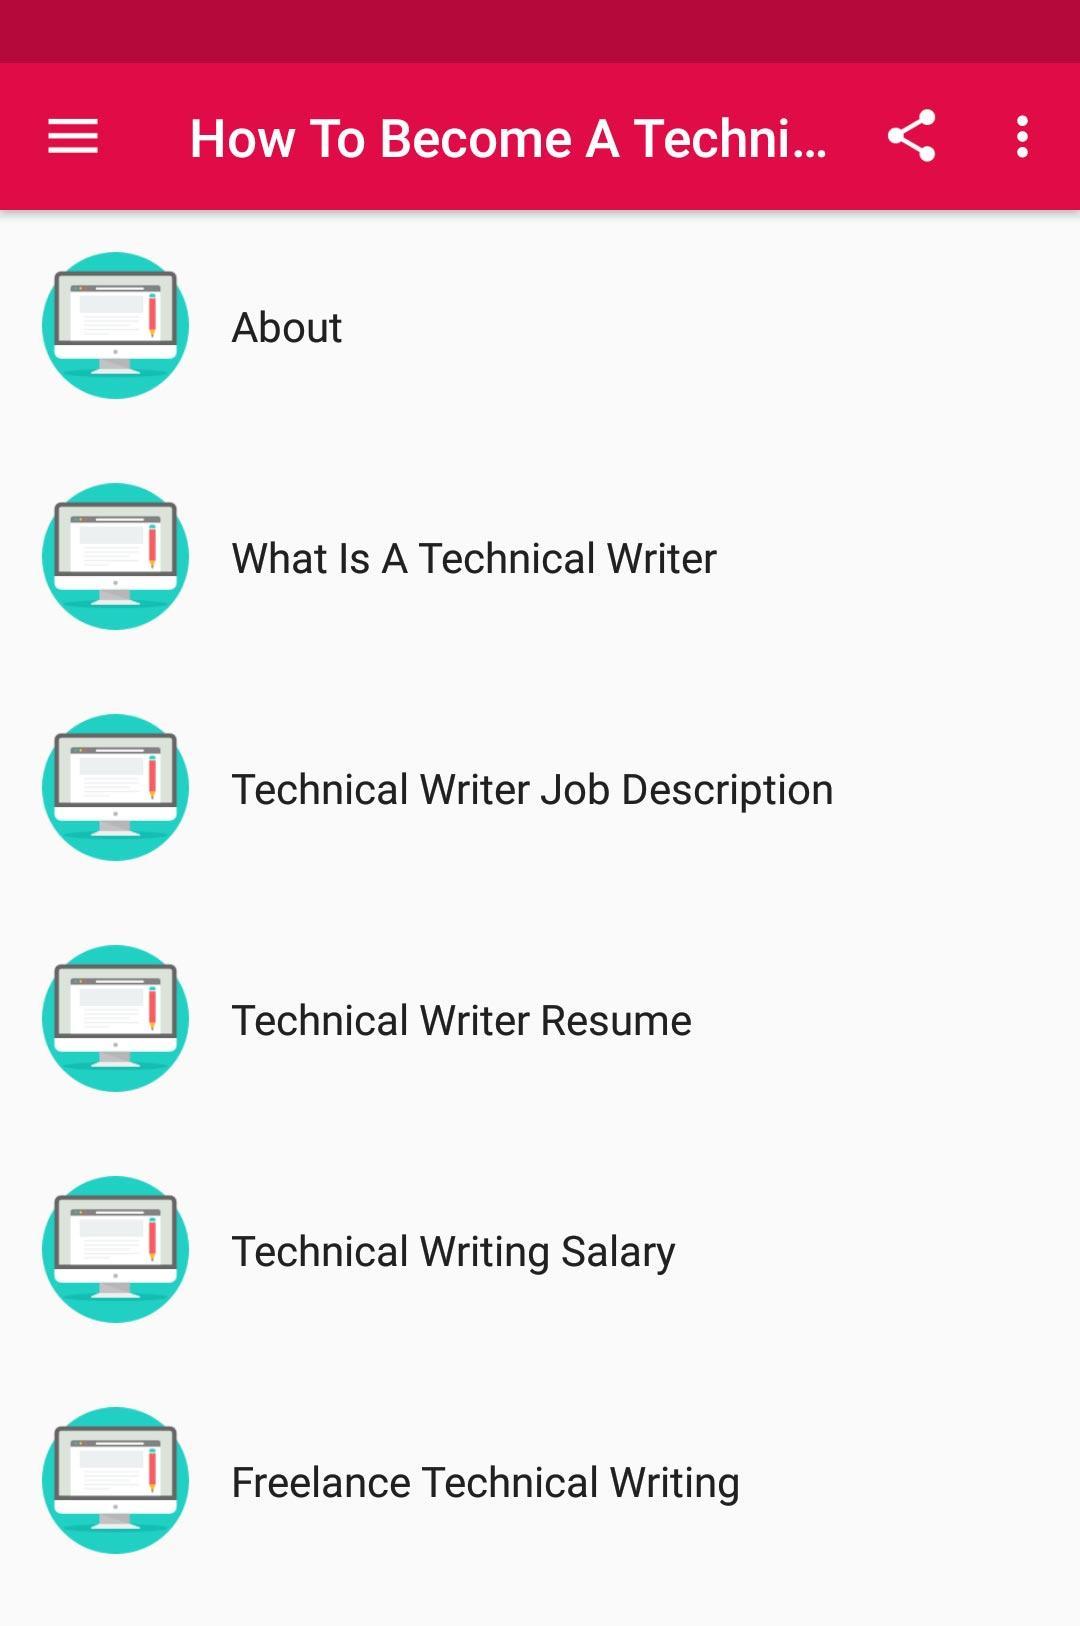 How To Become A Technical Writer for Android - APK Download